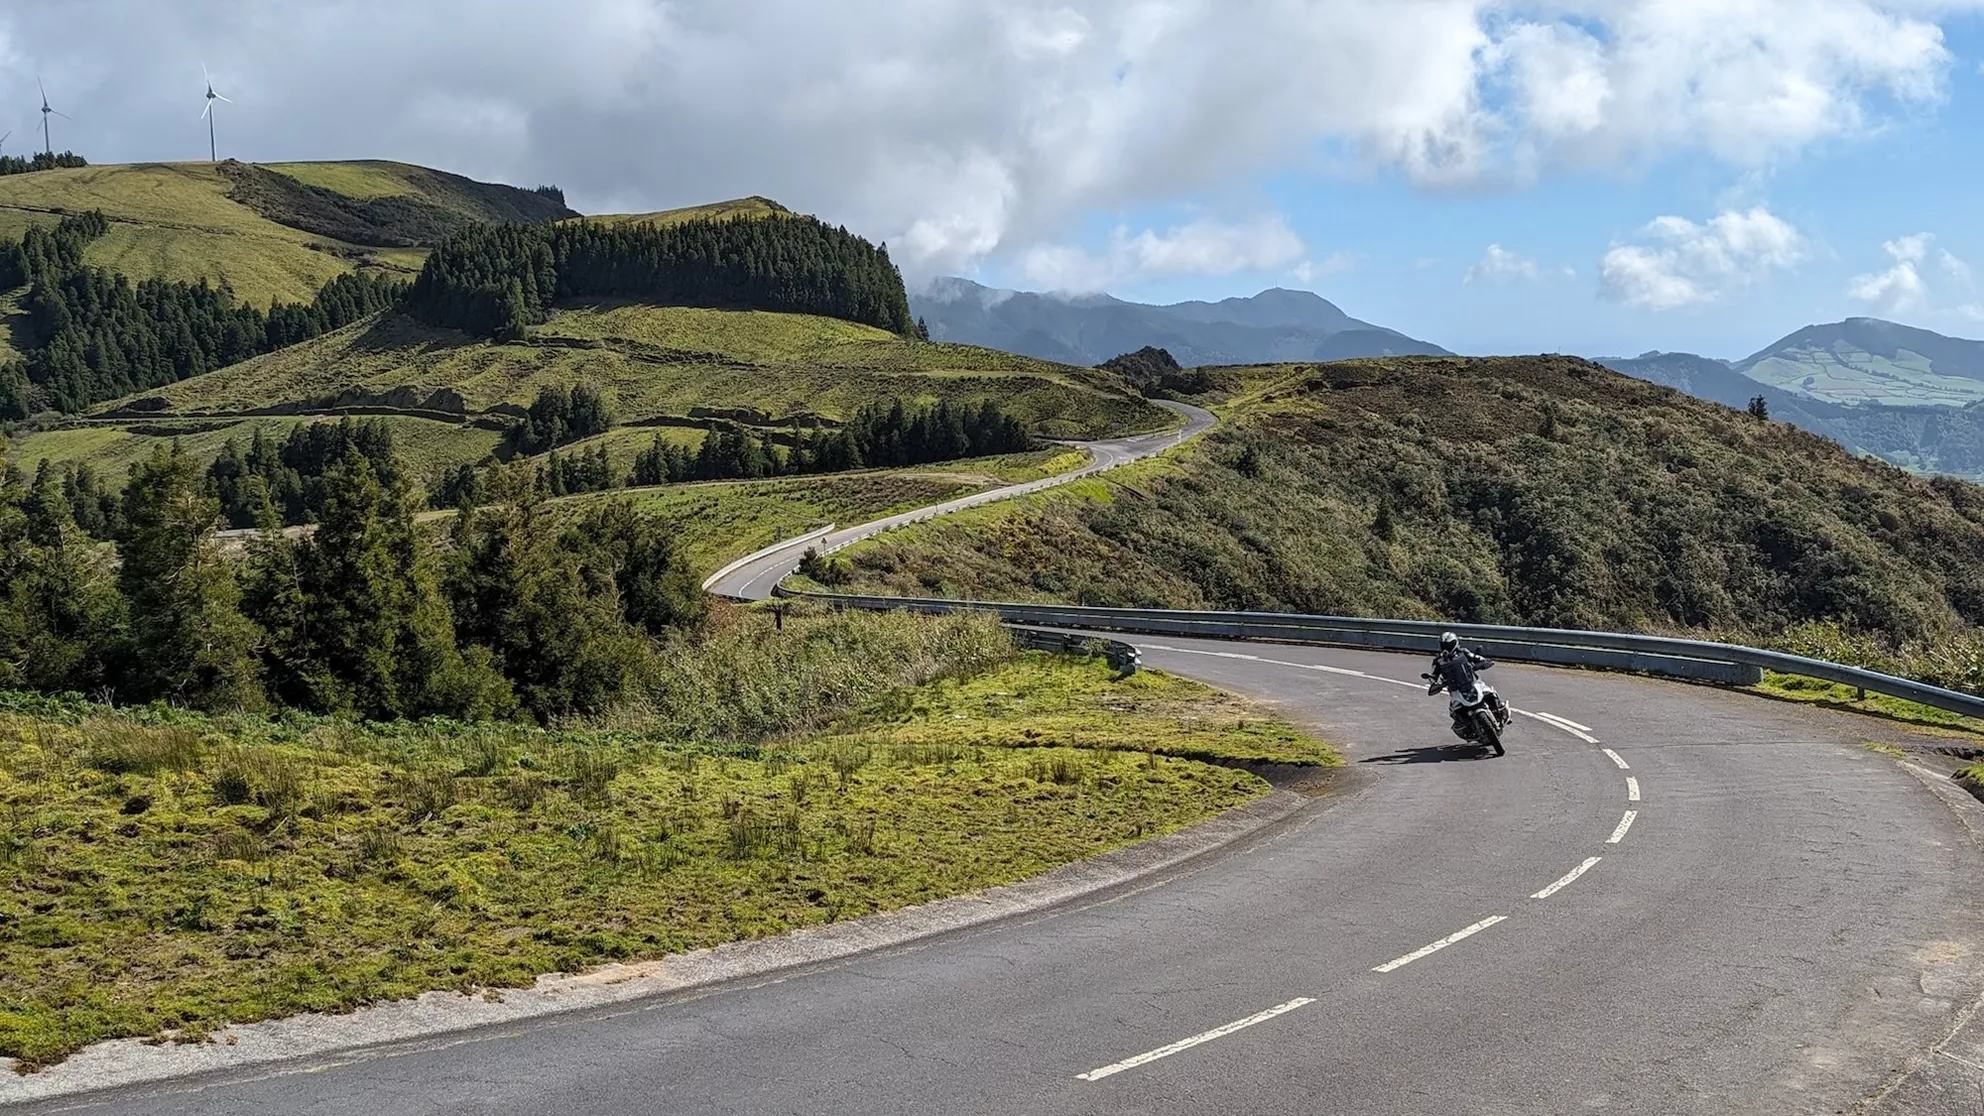 Fantastic curves, great views: motorcycling in the Azores